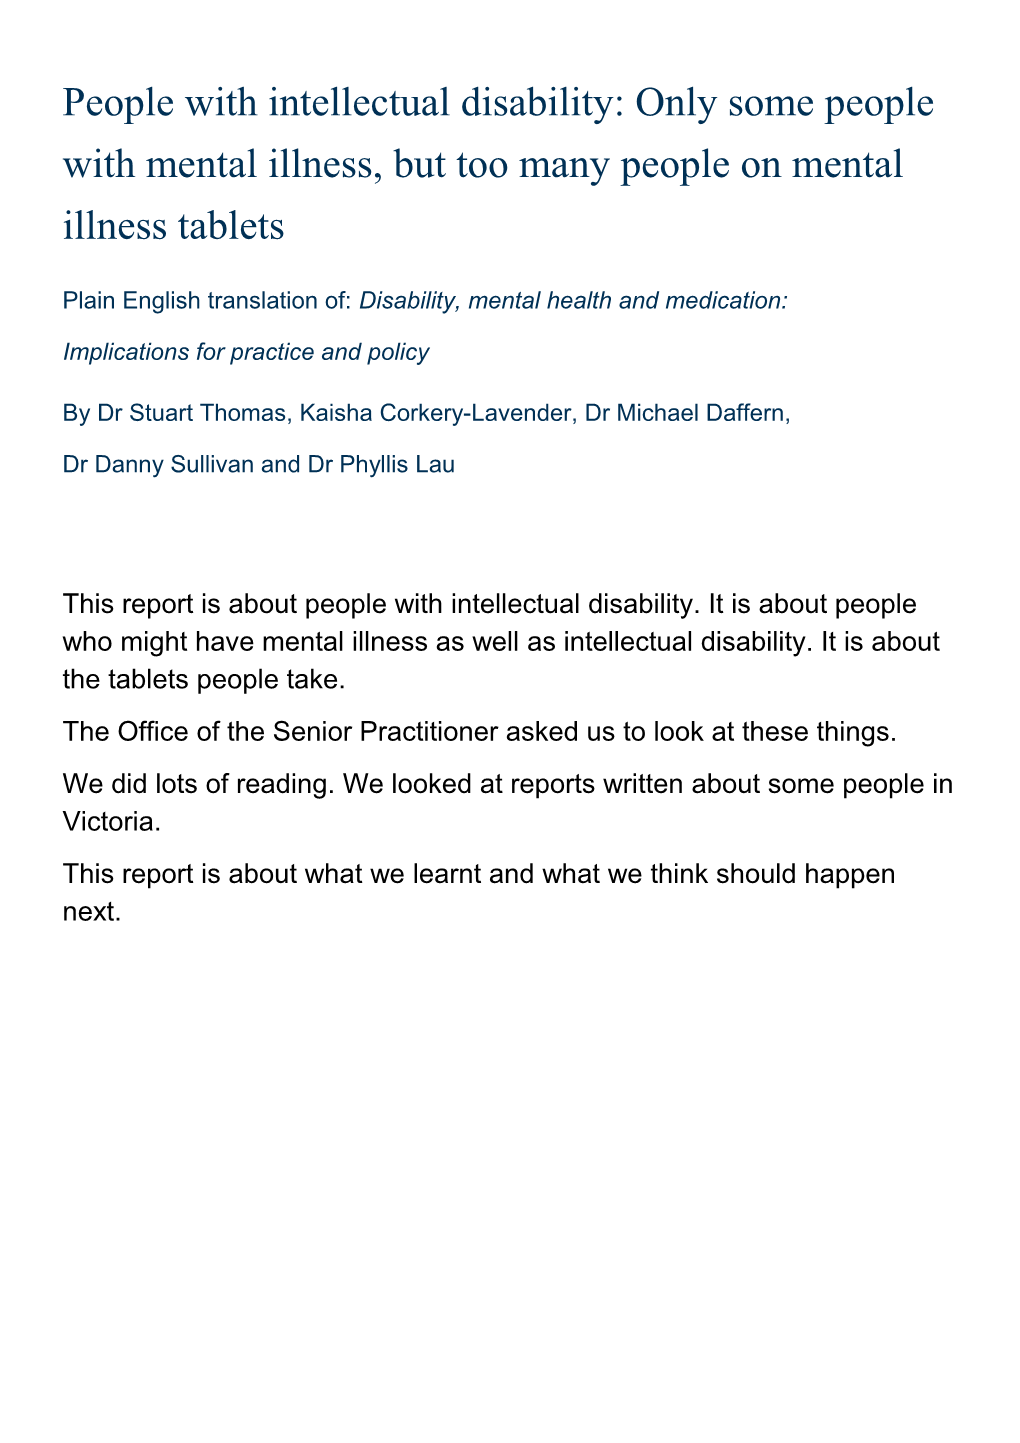 People with Intellectual Disability - Only Some People with Mental Illness, but Too Many